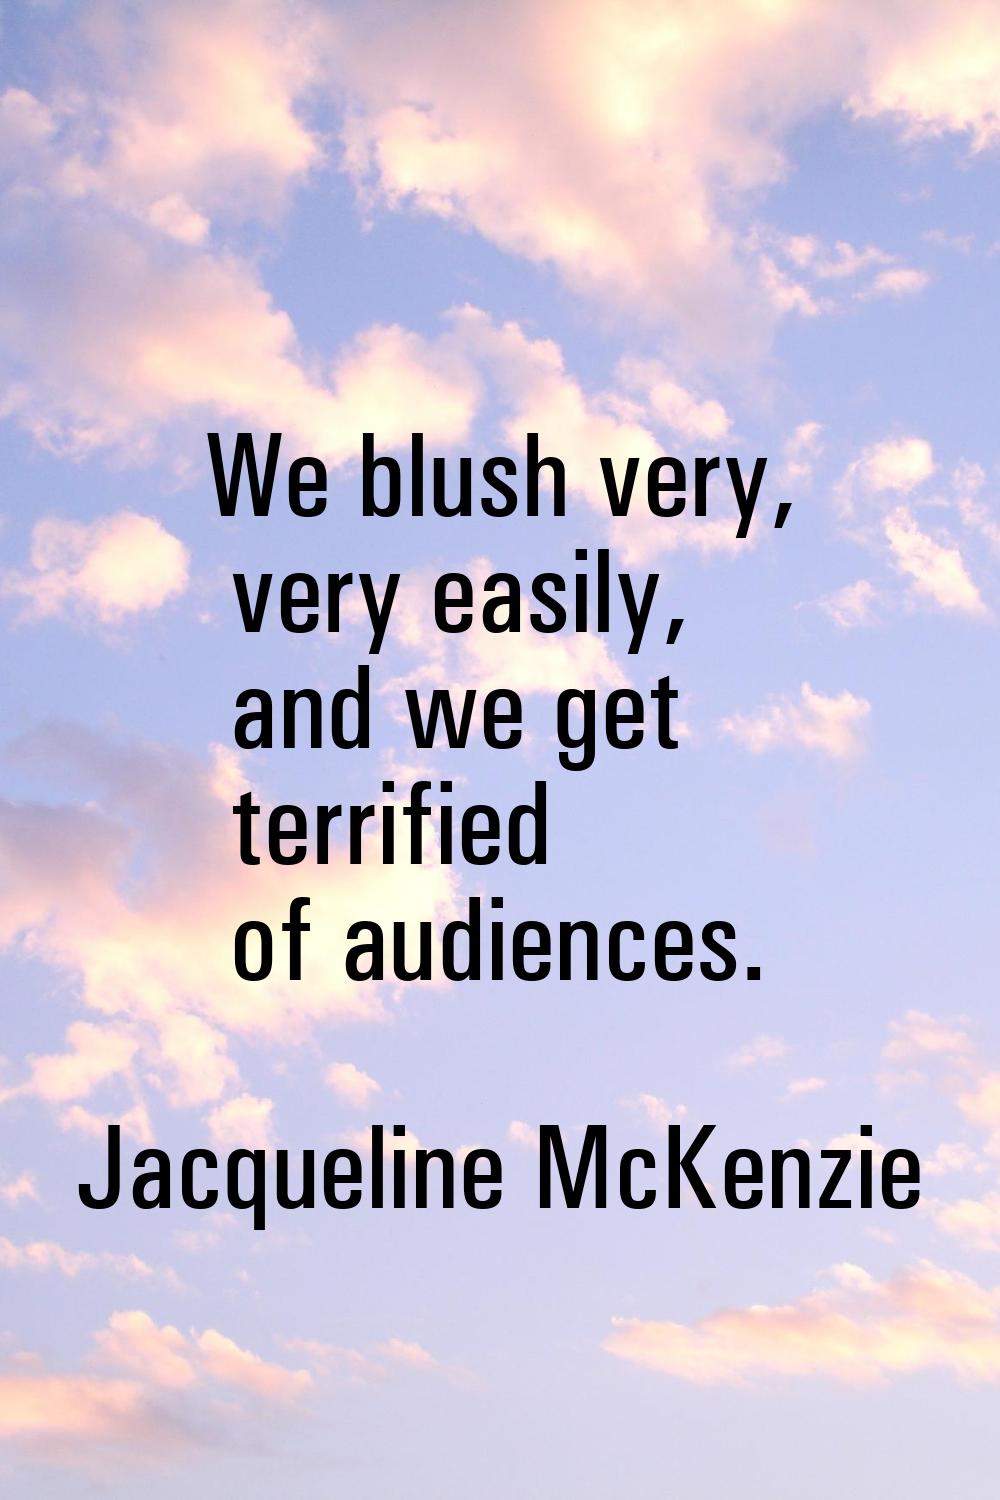 We blush very, very easily, and we get terrified of audiences.